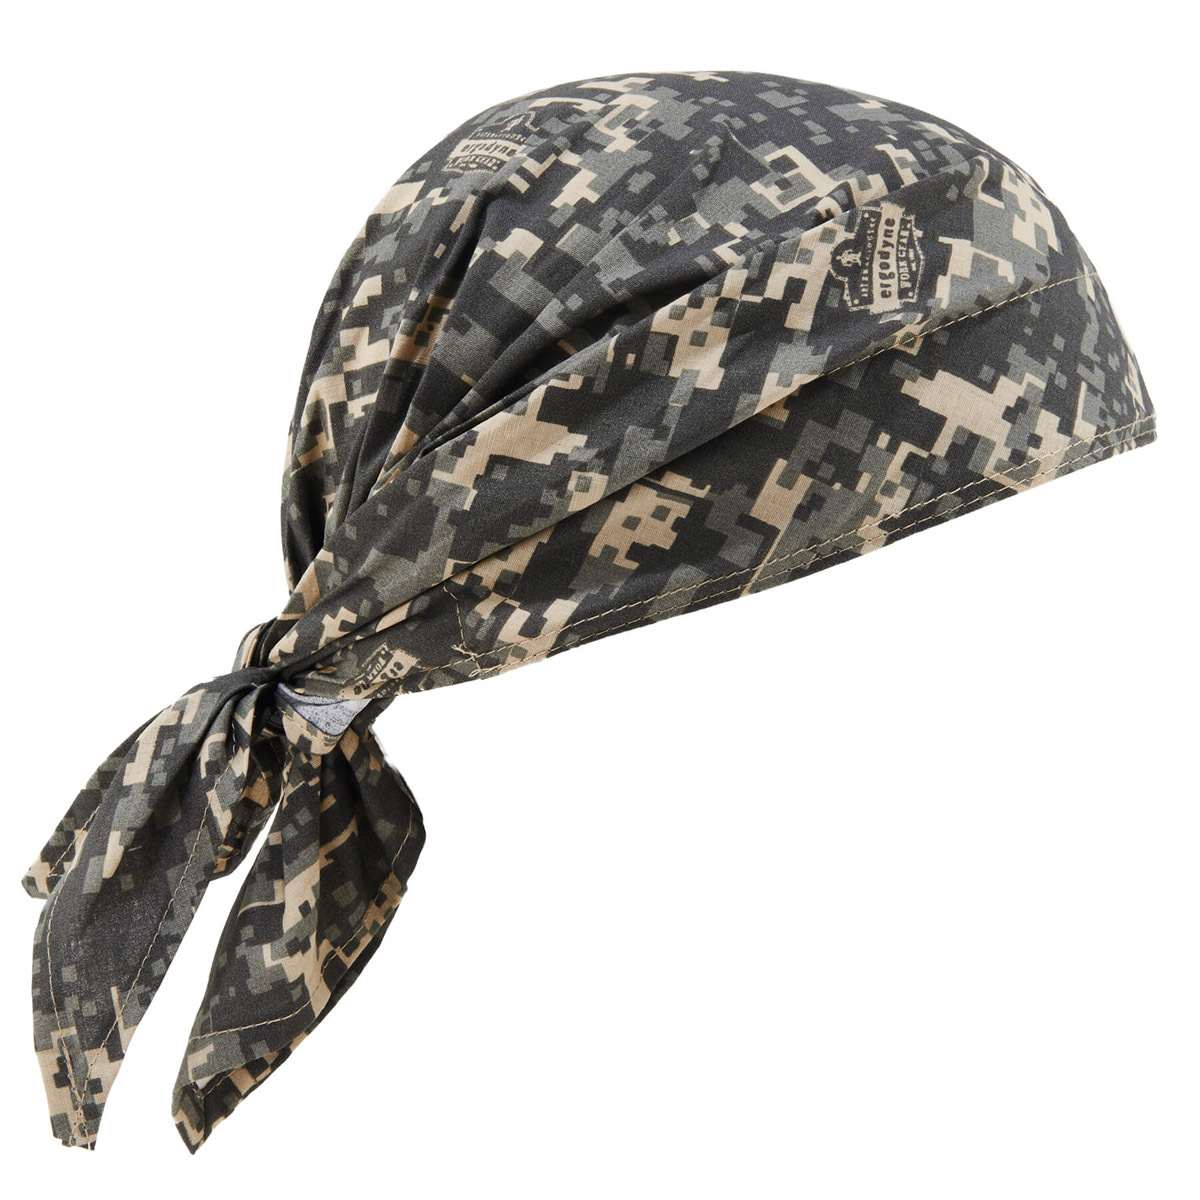 Ergodyne Camouflage Chill-Its® 6710 Cotton/Polymer Evaporative Cooling Hat